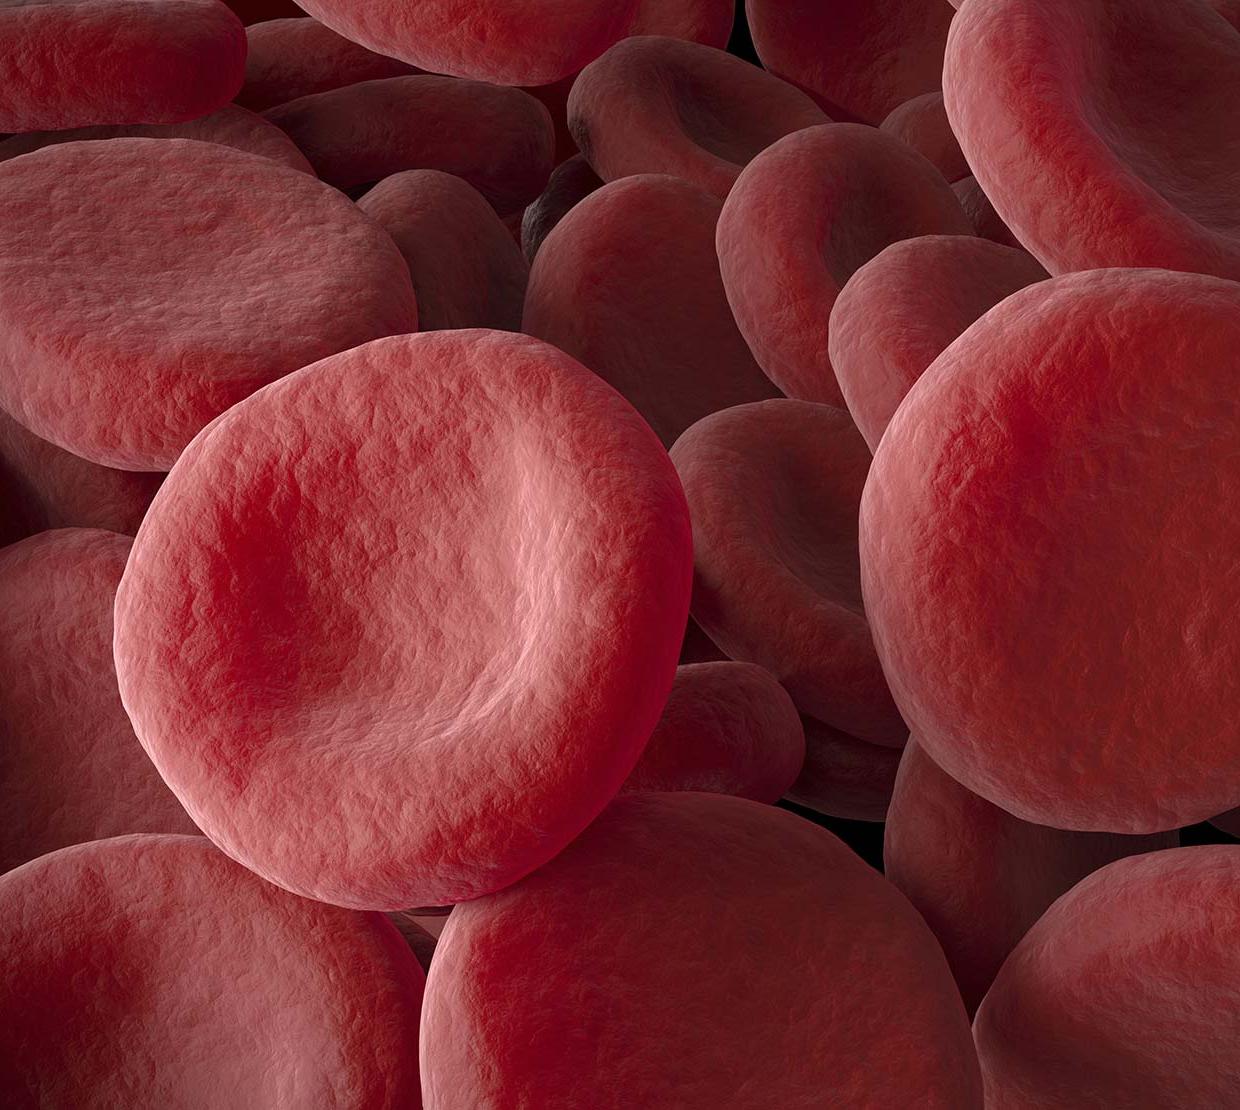 Animation of red blood cells